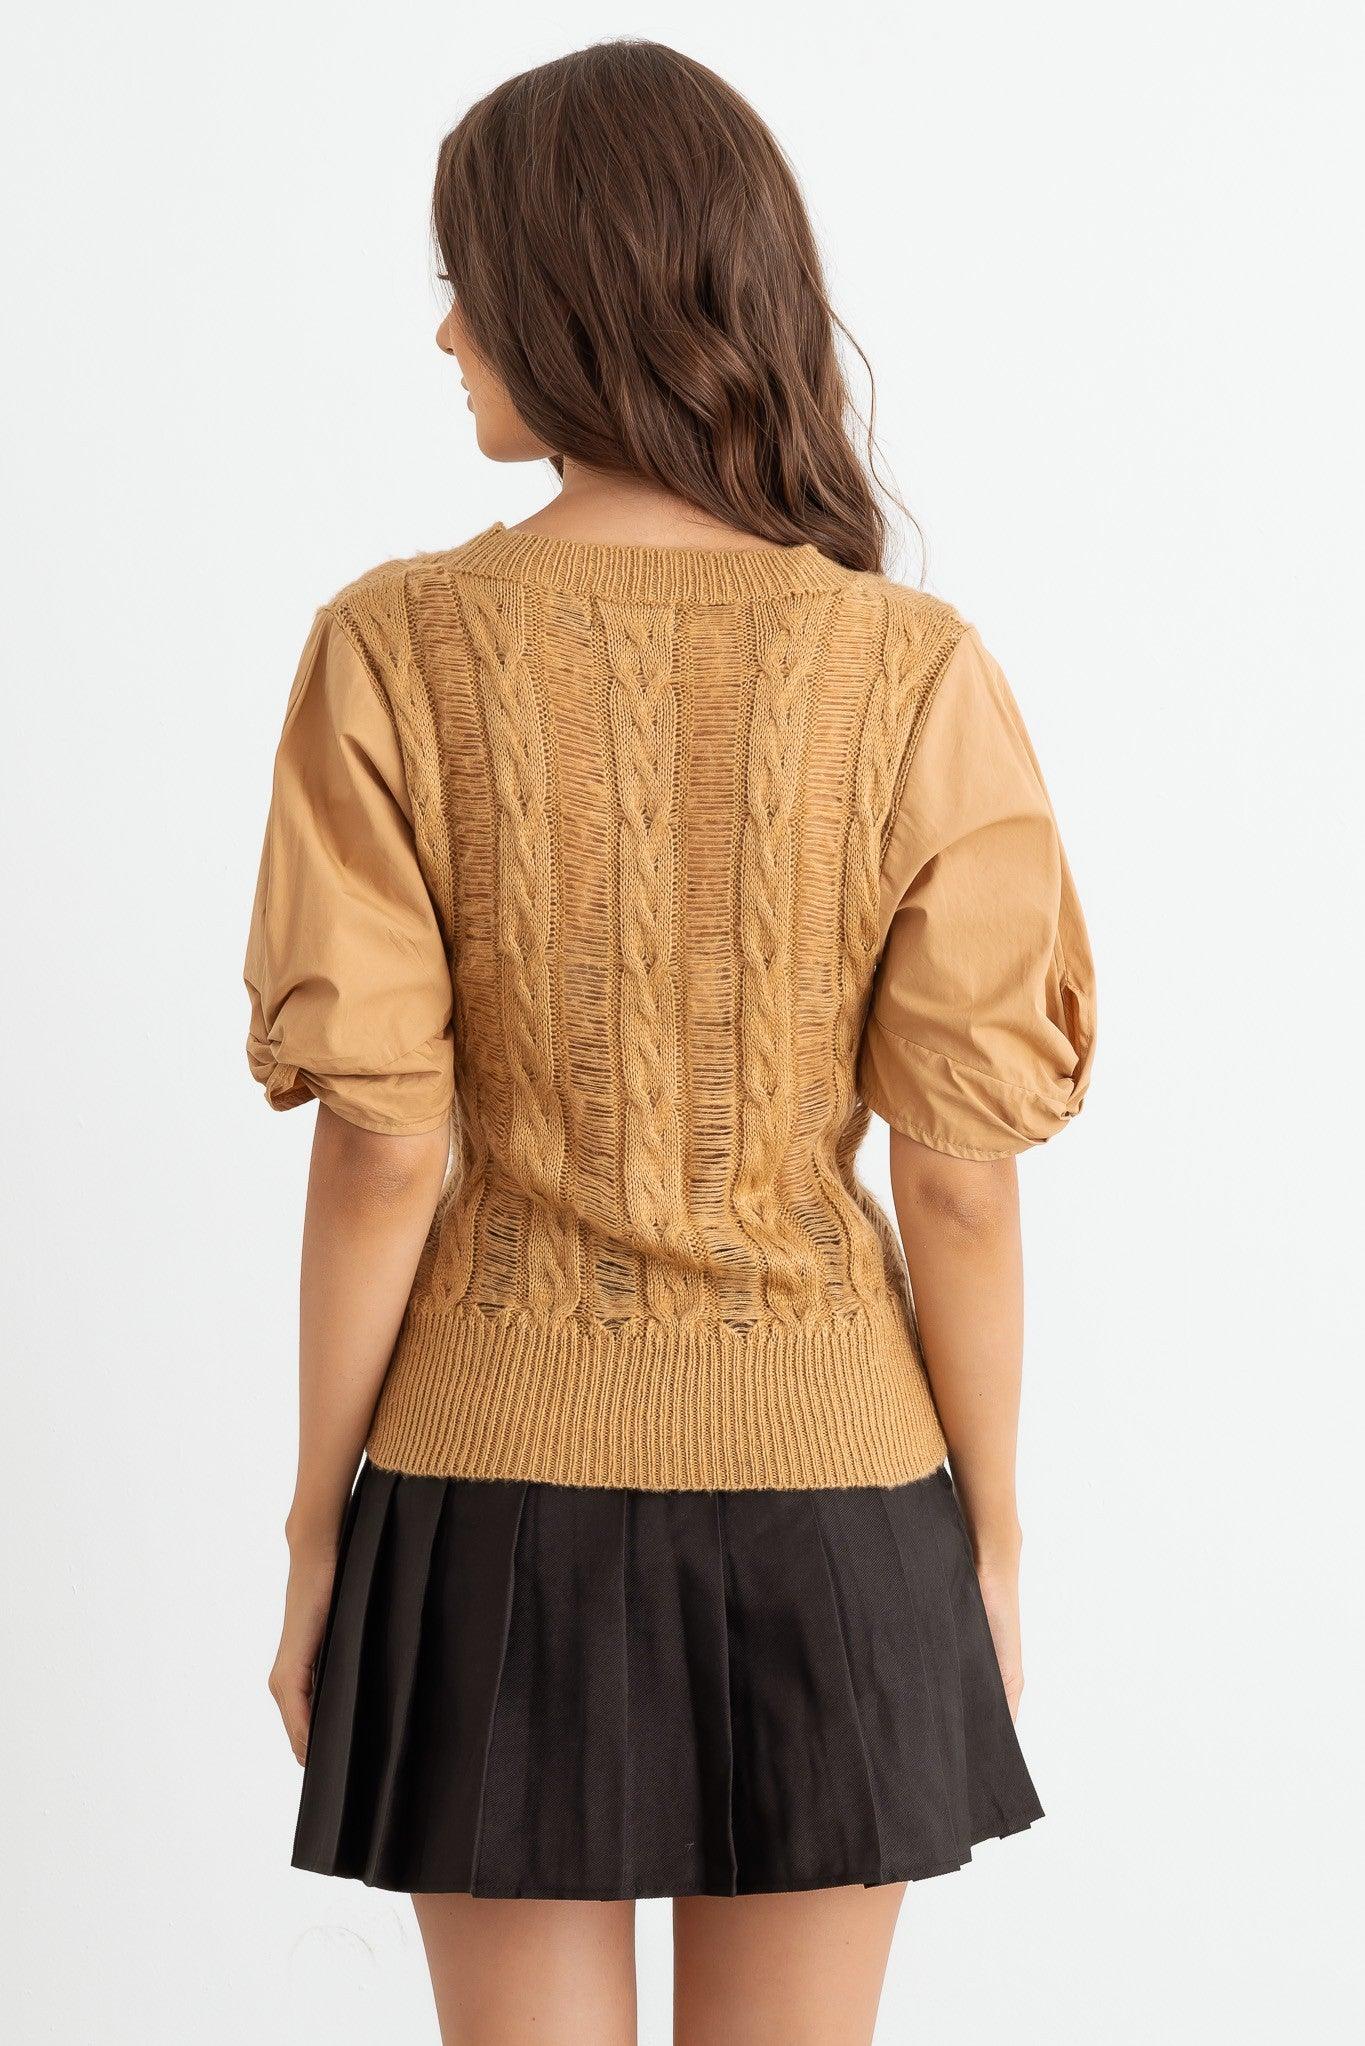 Nude Distressed Cable Knit Puff Short Sleeve Top - Back